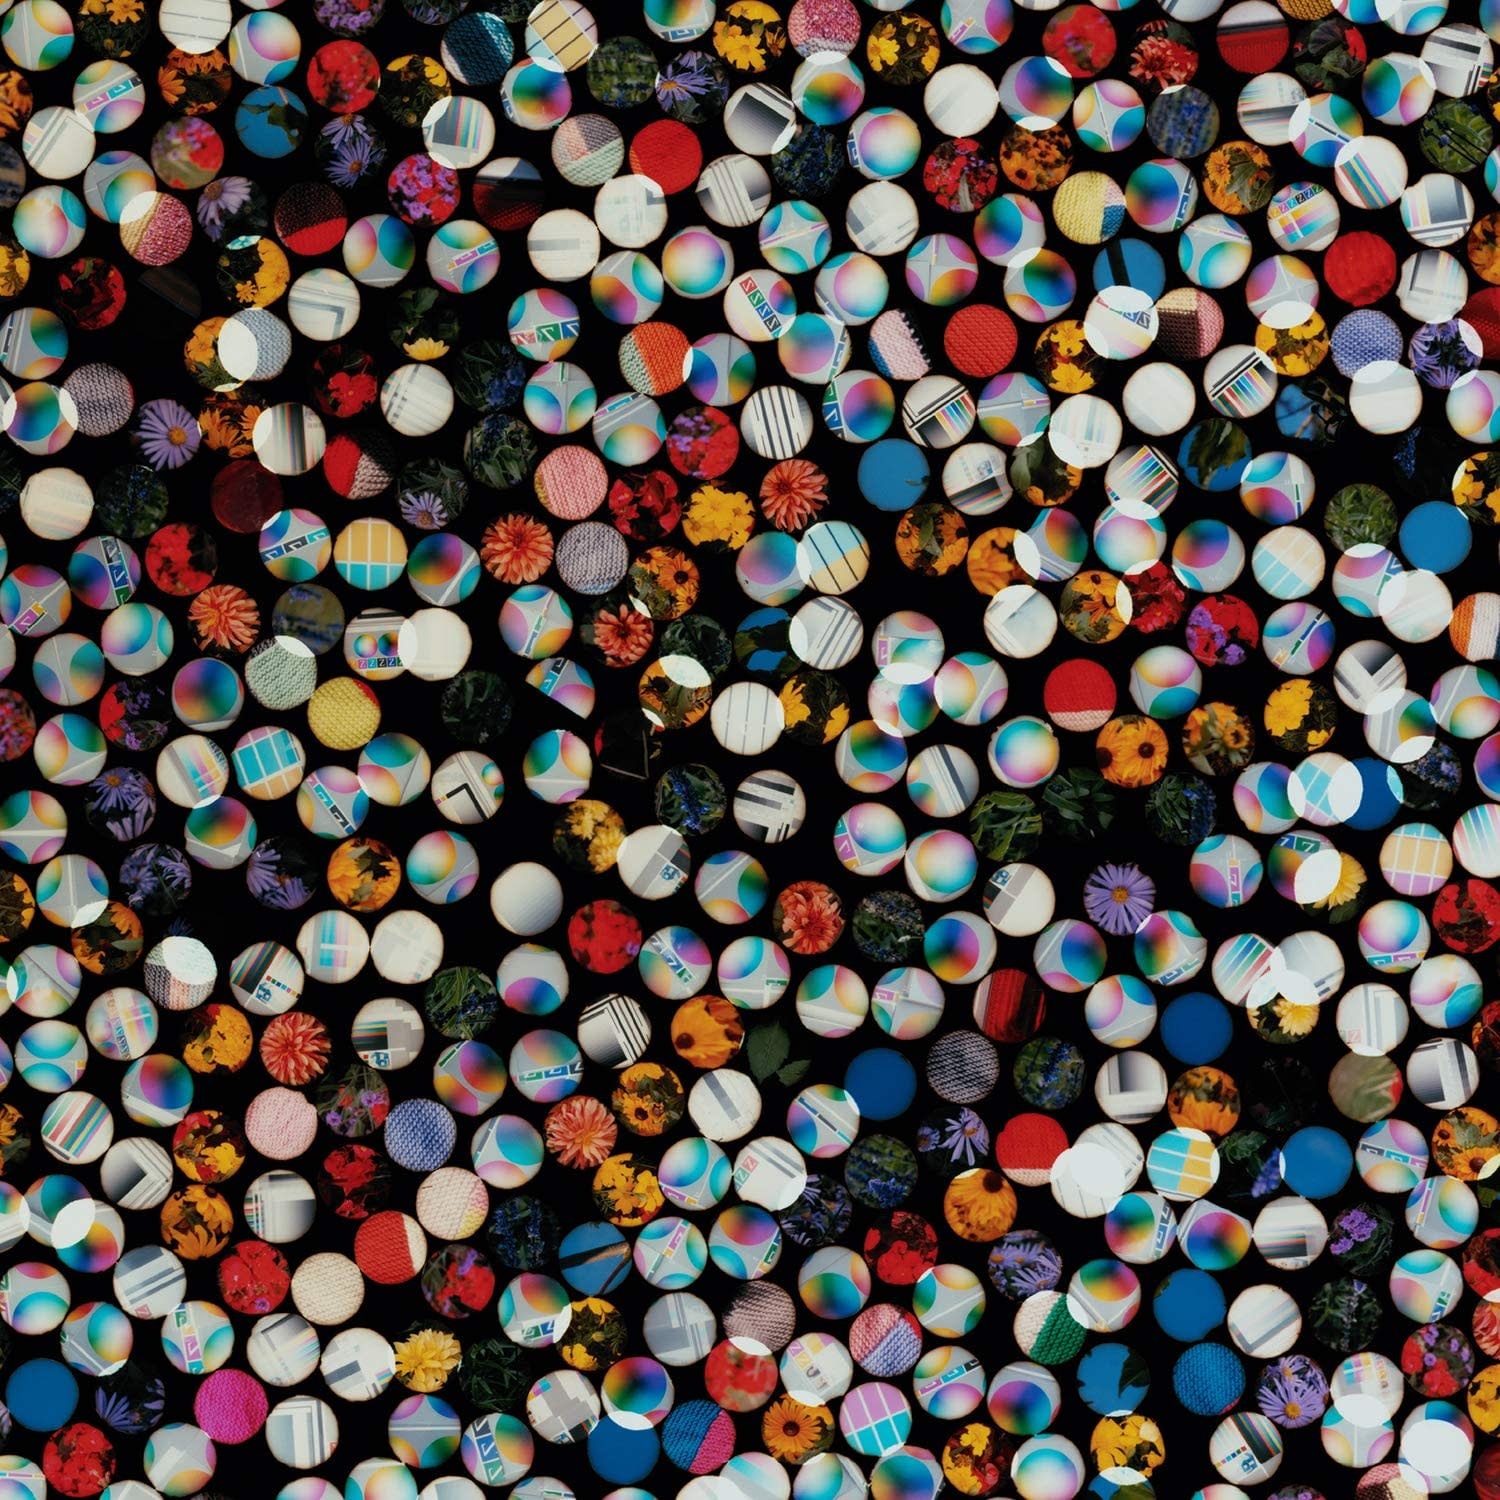 Four Tet - There Is Love In You (Expanded Edition)